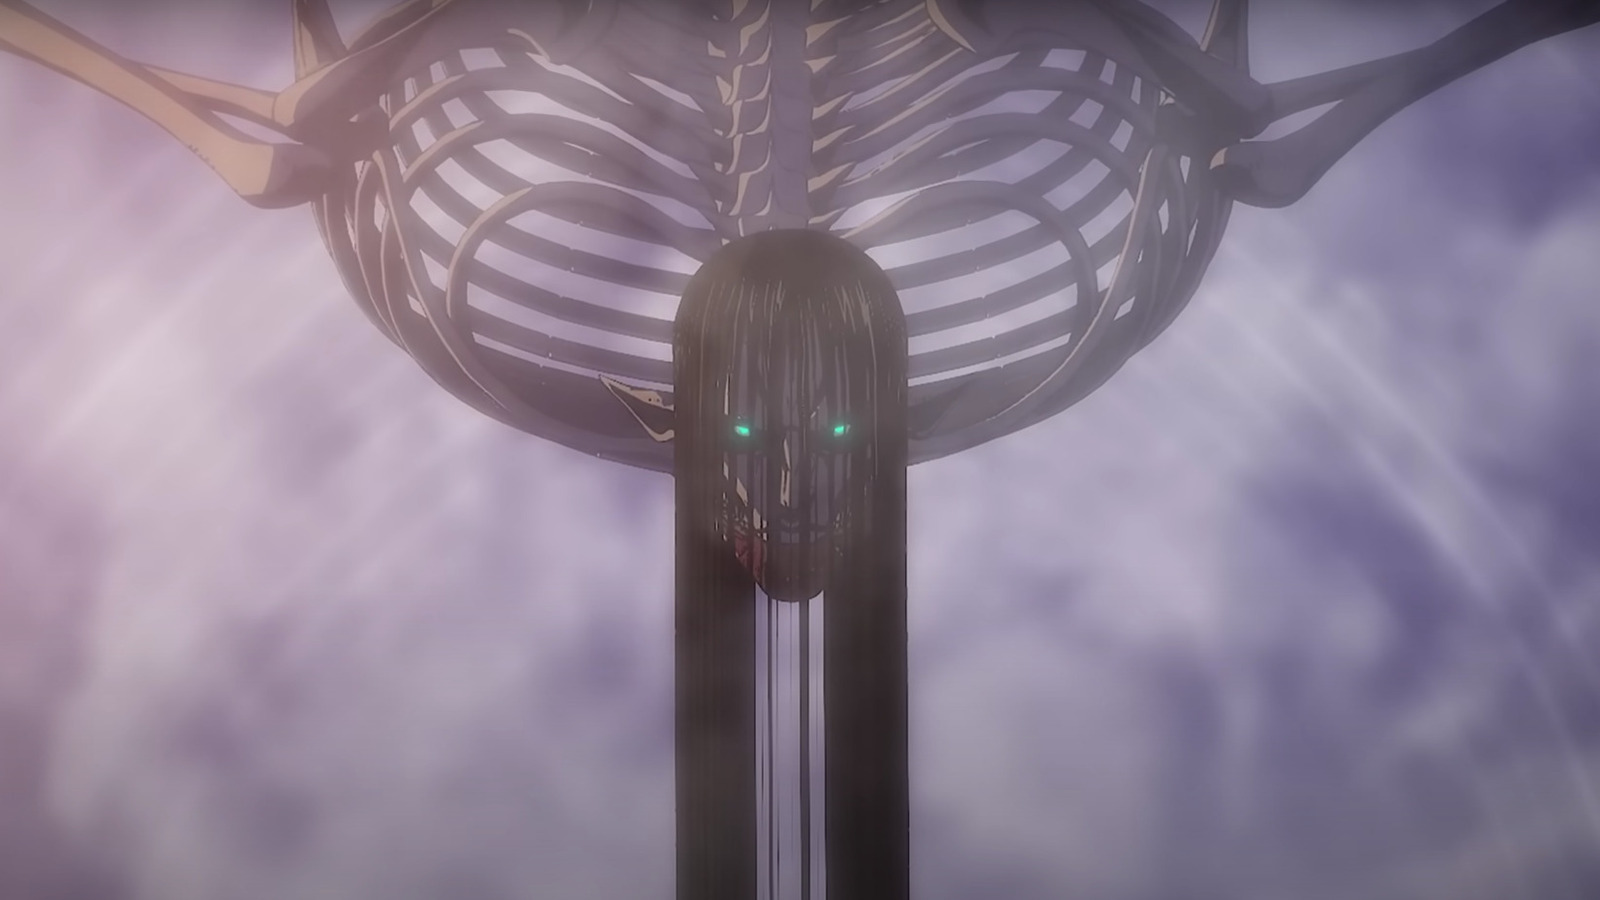 Attack on Titan - The Ending We've Been Waiting For - Anime Corner